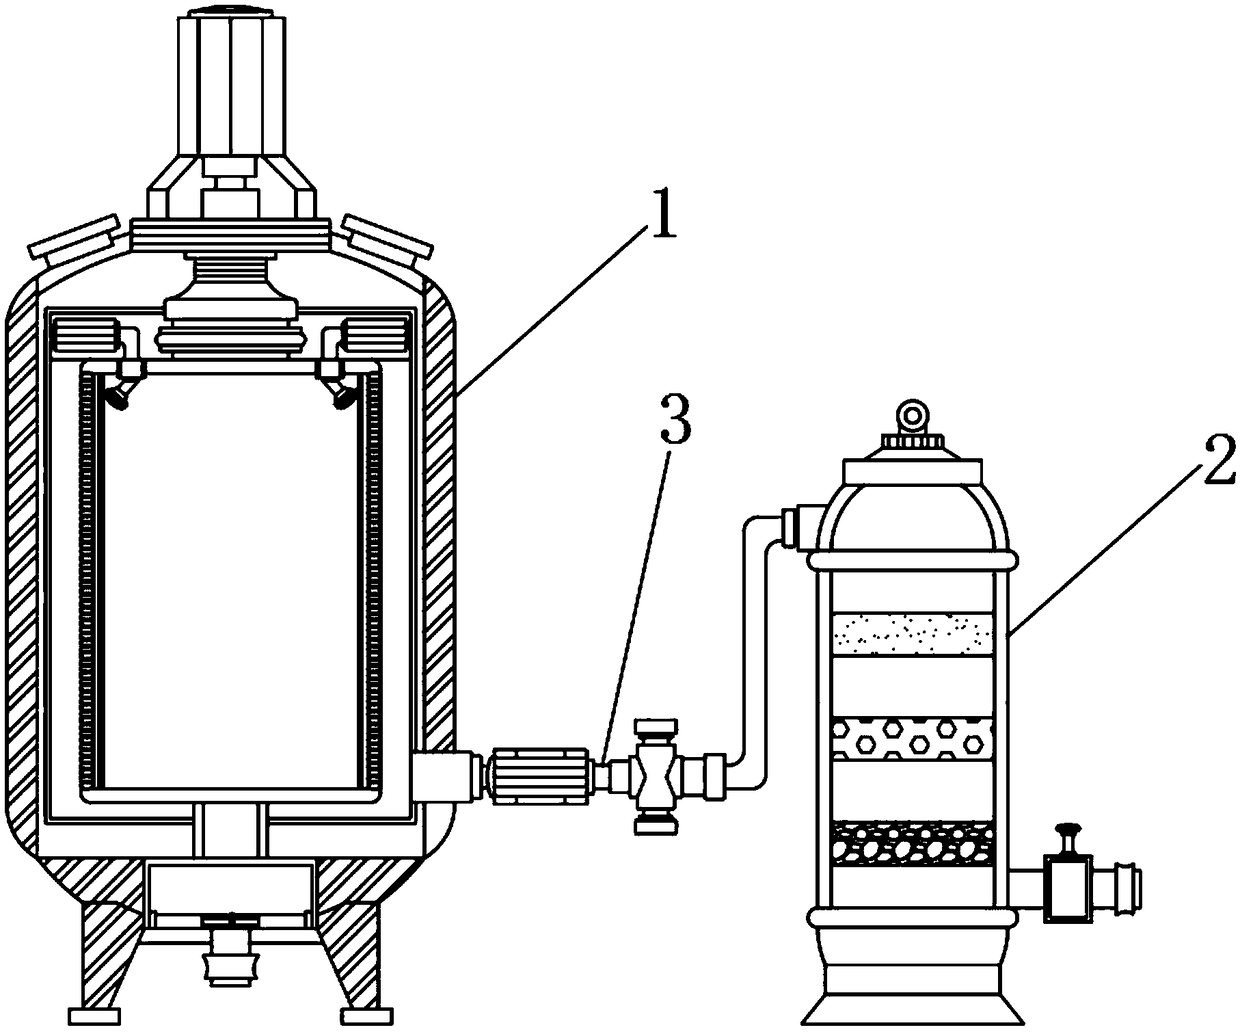 Dirt separation equipment for water environment